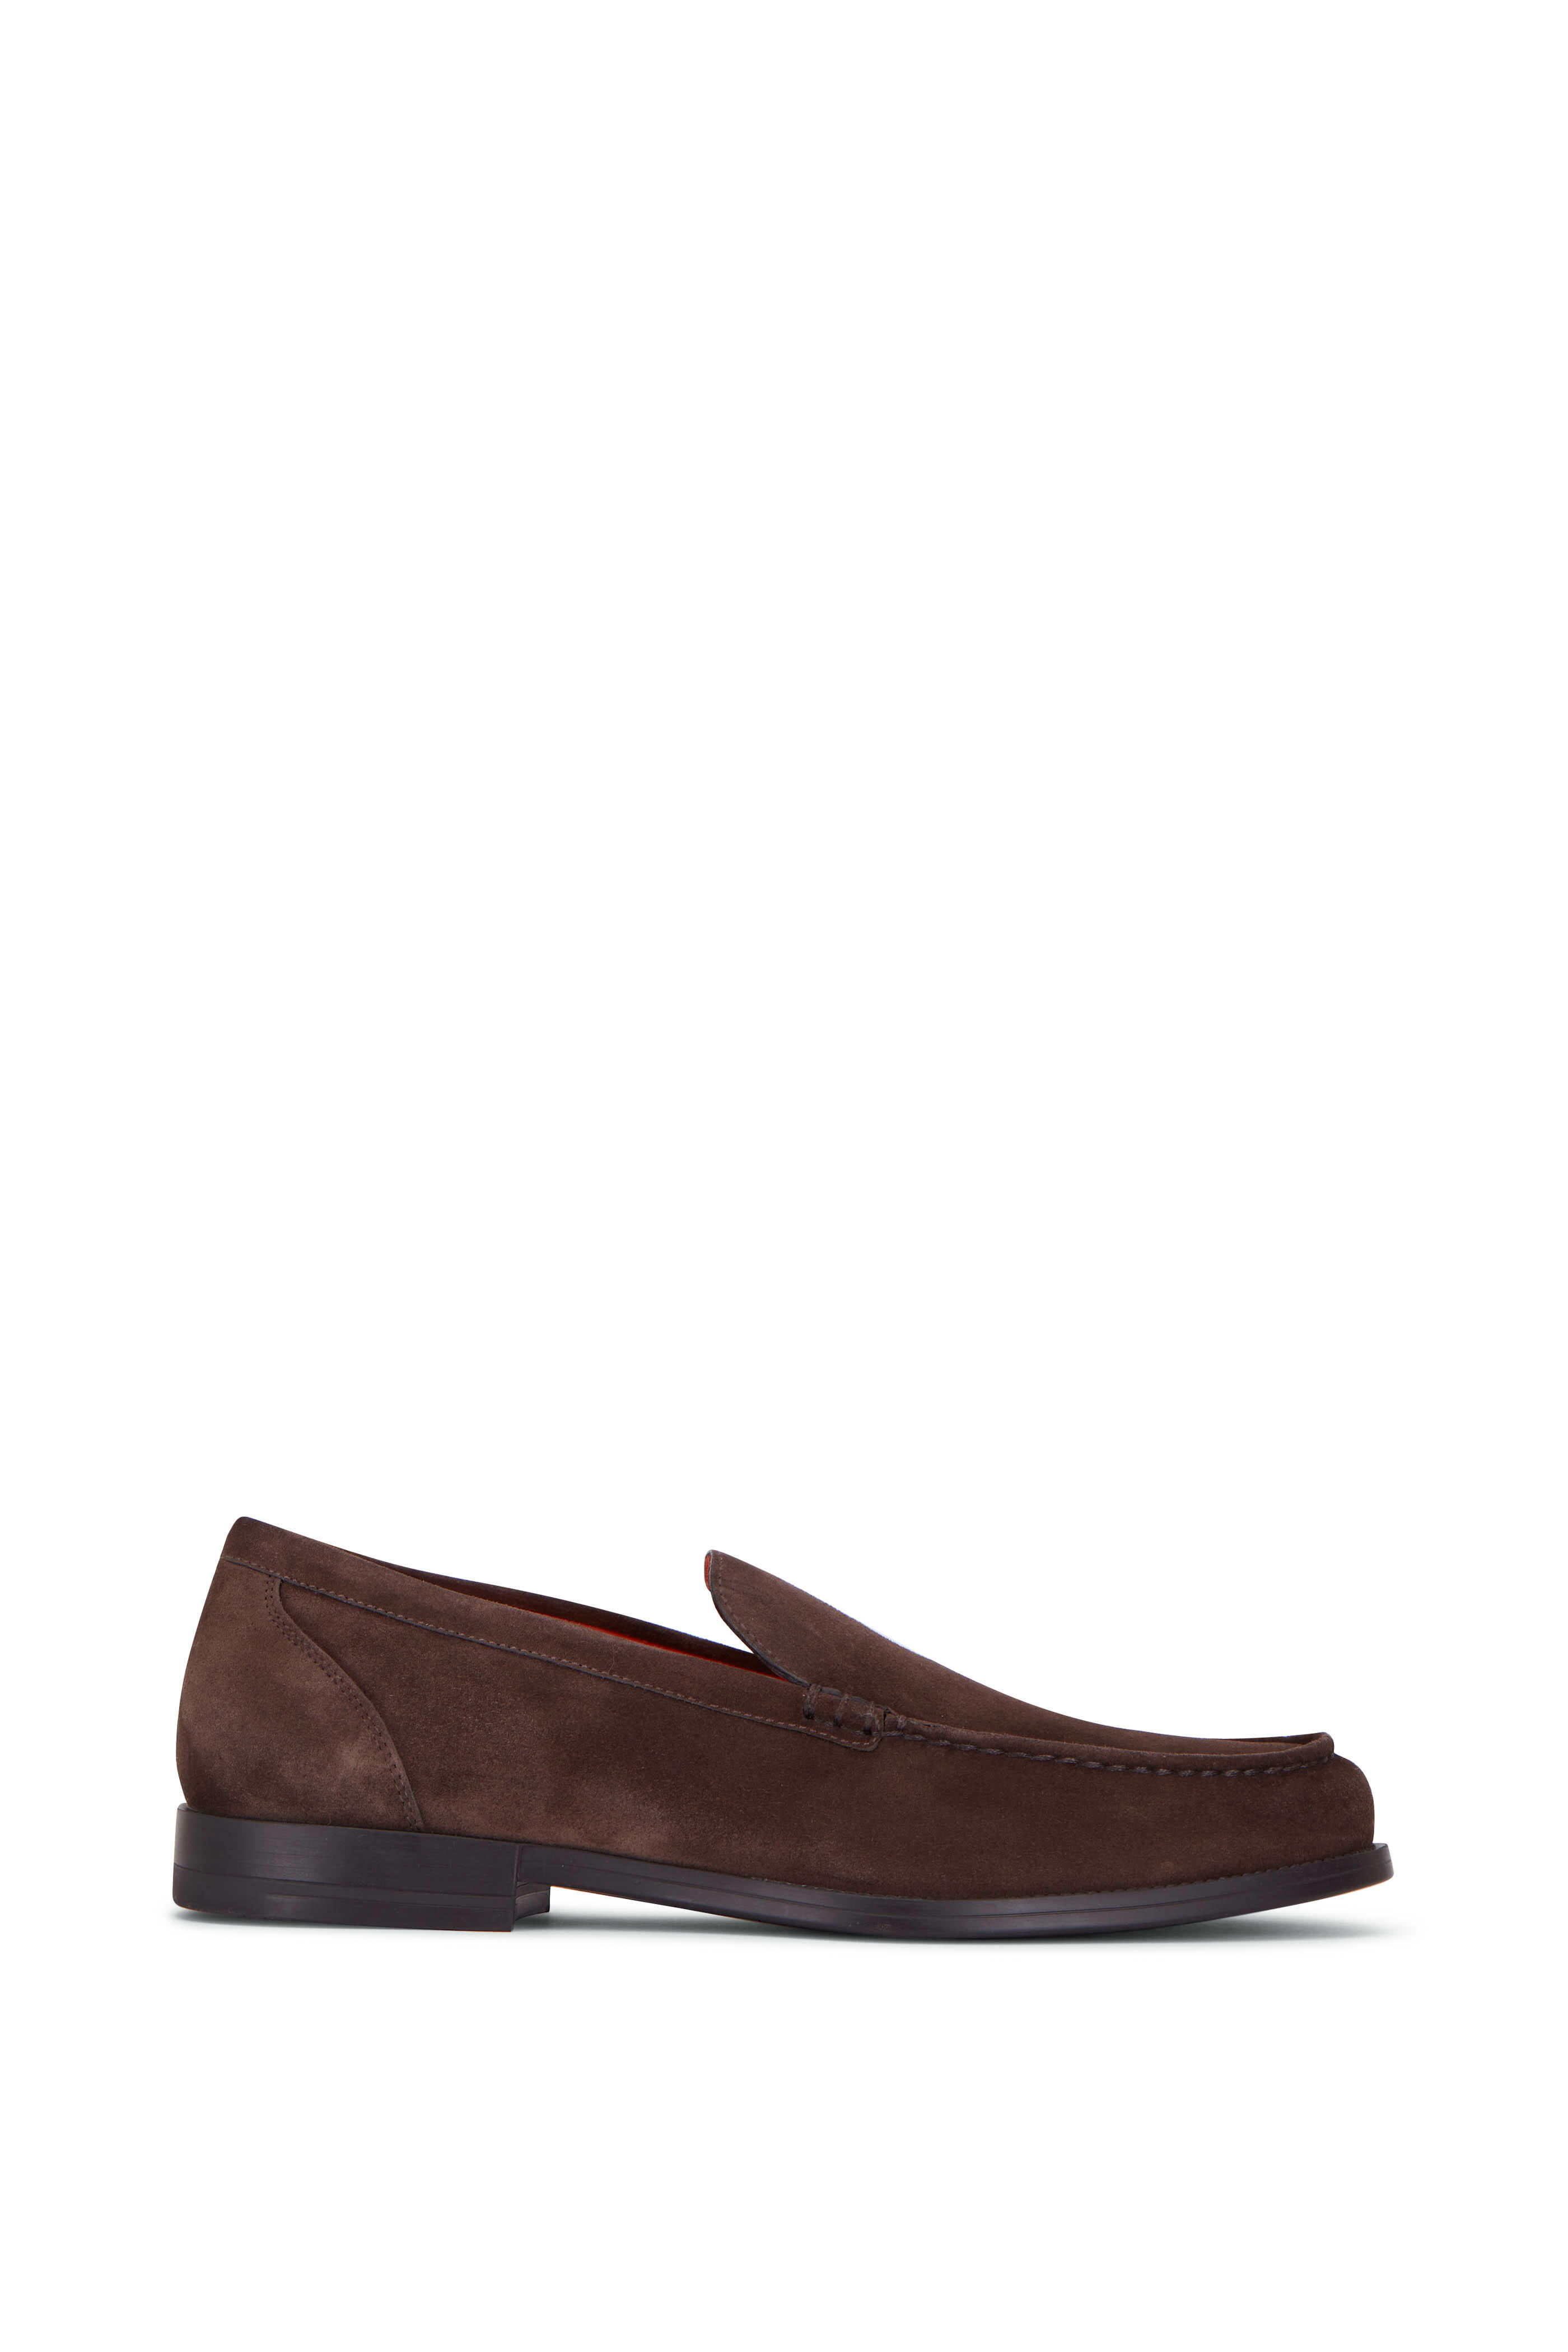 Santoni - Faith Brown Suede Loafer | Mitchell Stores